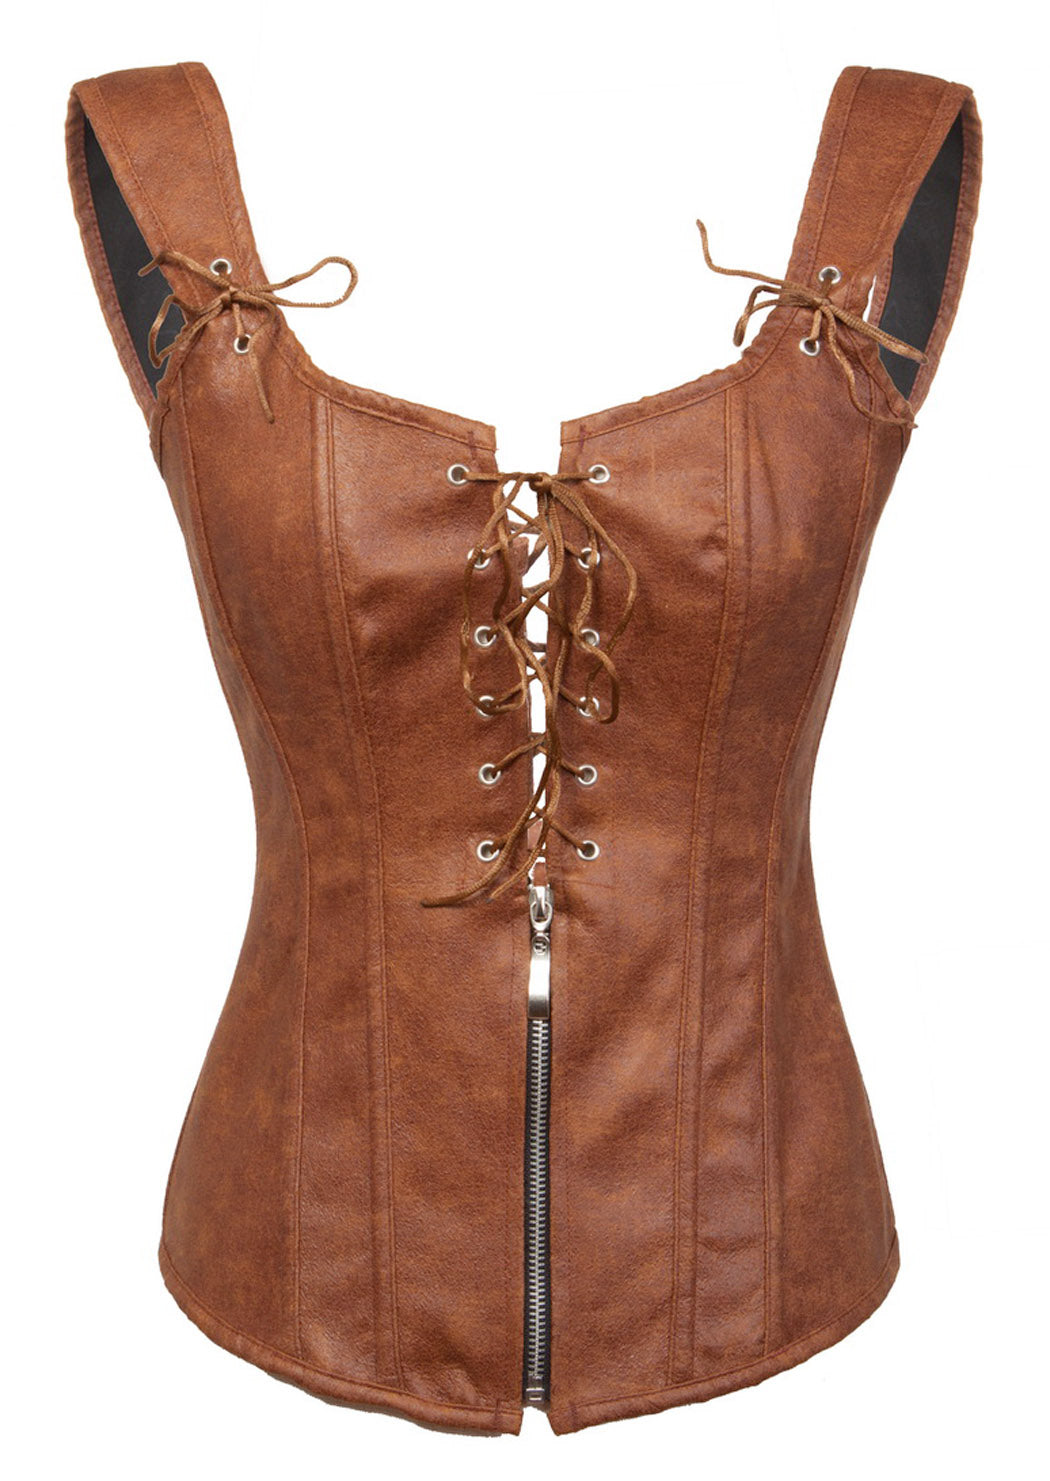  Plus Size Corset Steampunk Corset Leather Corsets For Women  Leather Corset Top Bustier X-Small Red